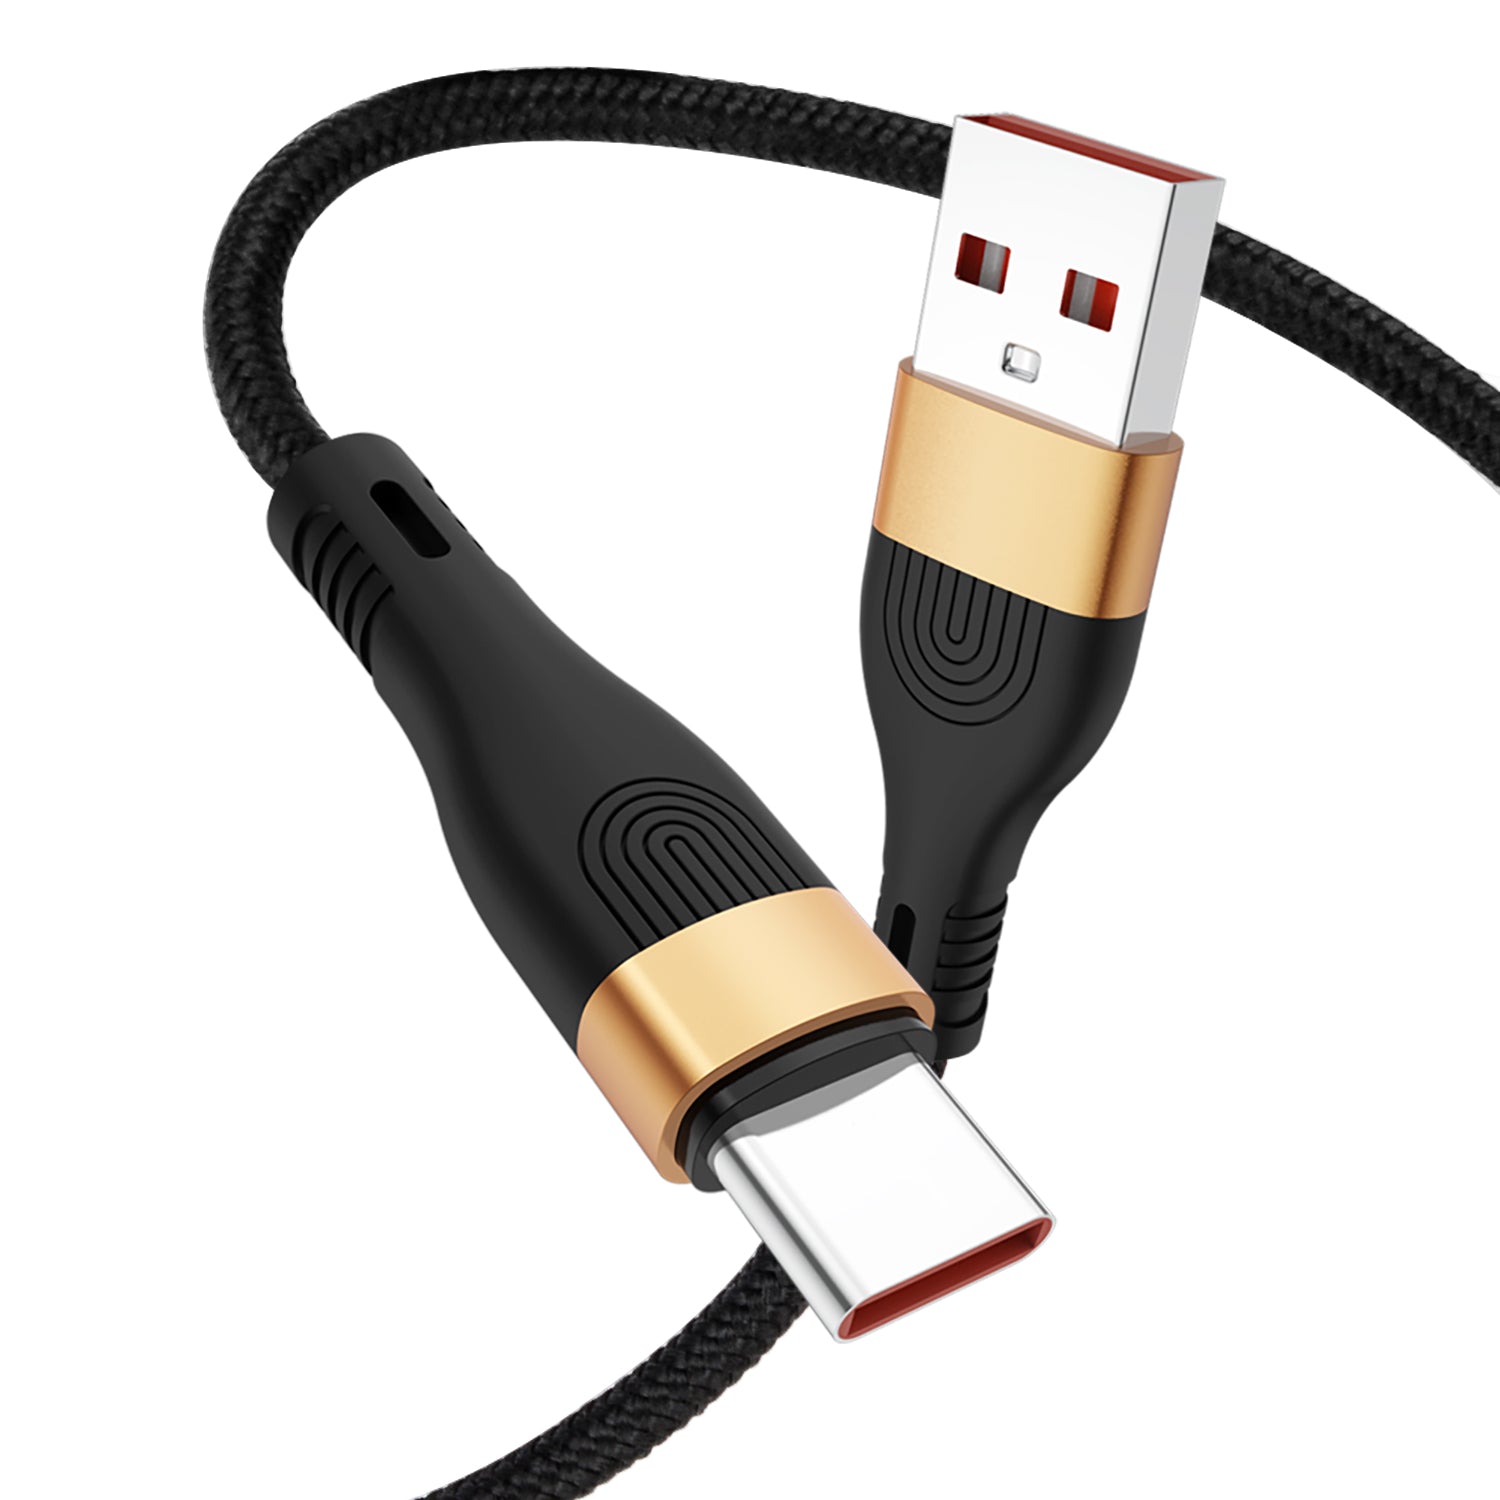 USB Type C Charge & Sync Cable, USB A to Type C Fast Charging Cable for Samsung